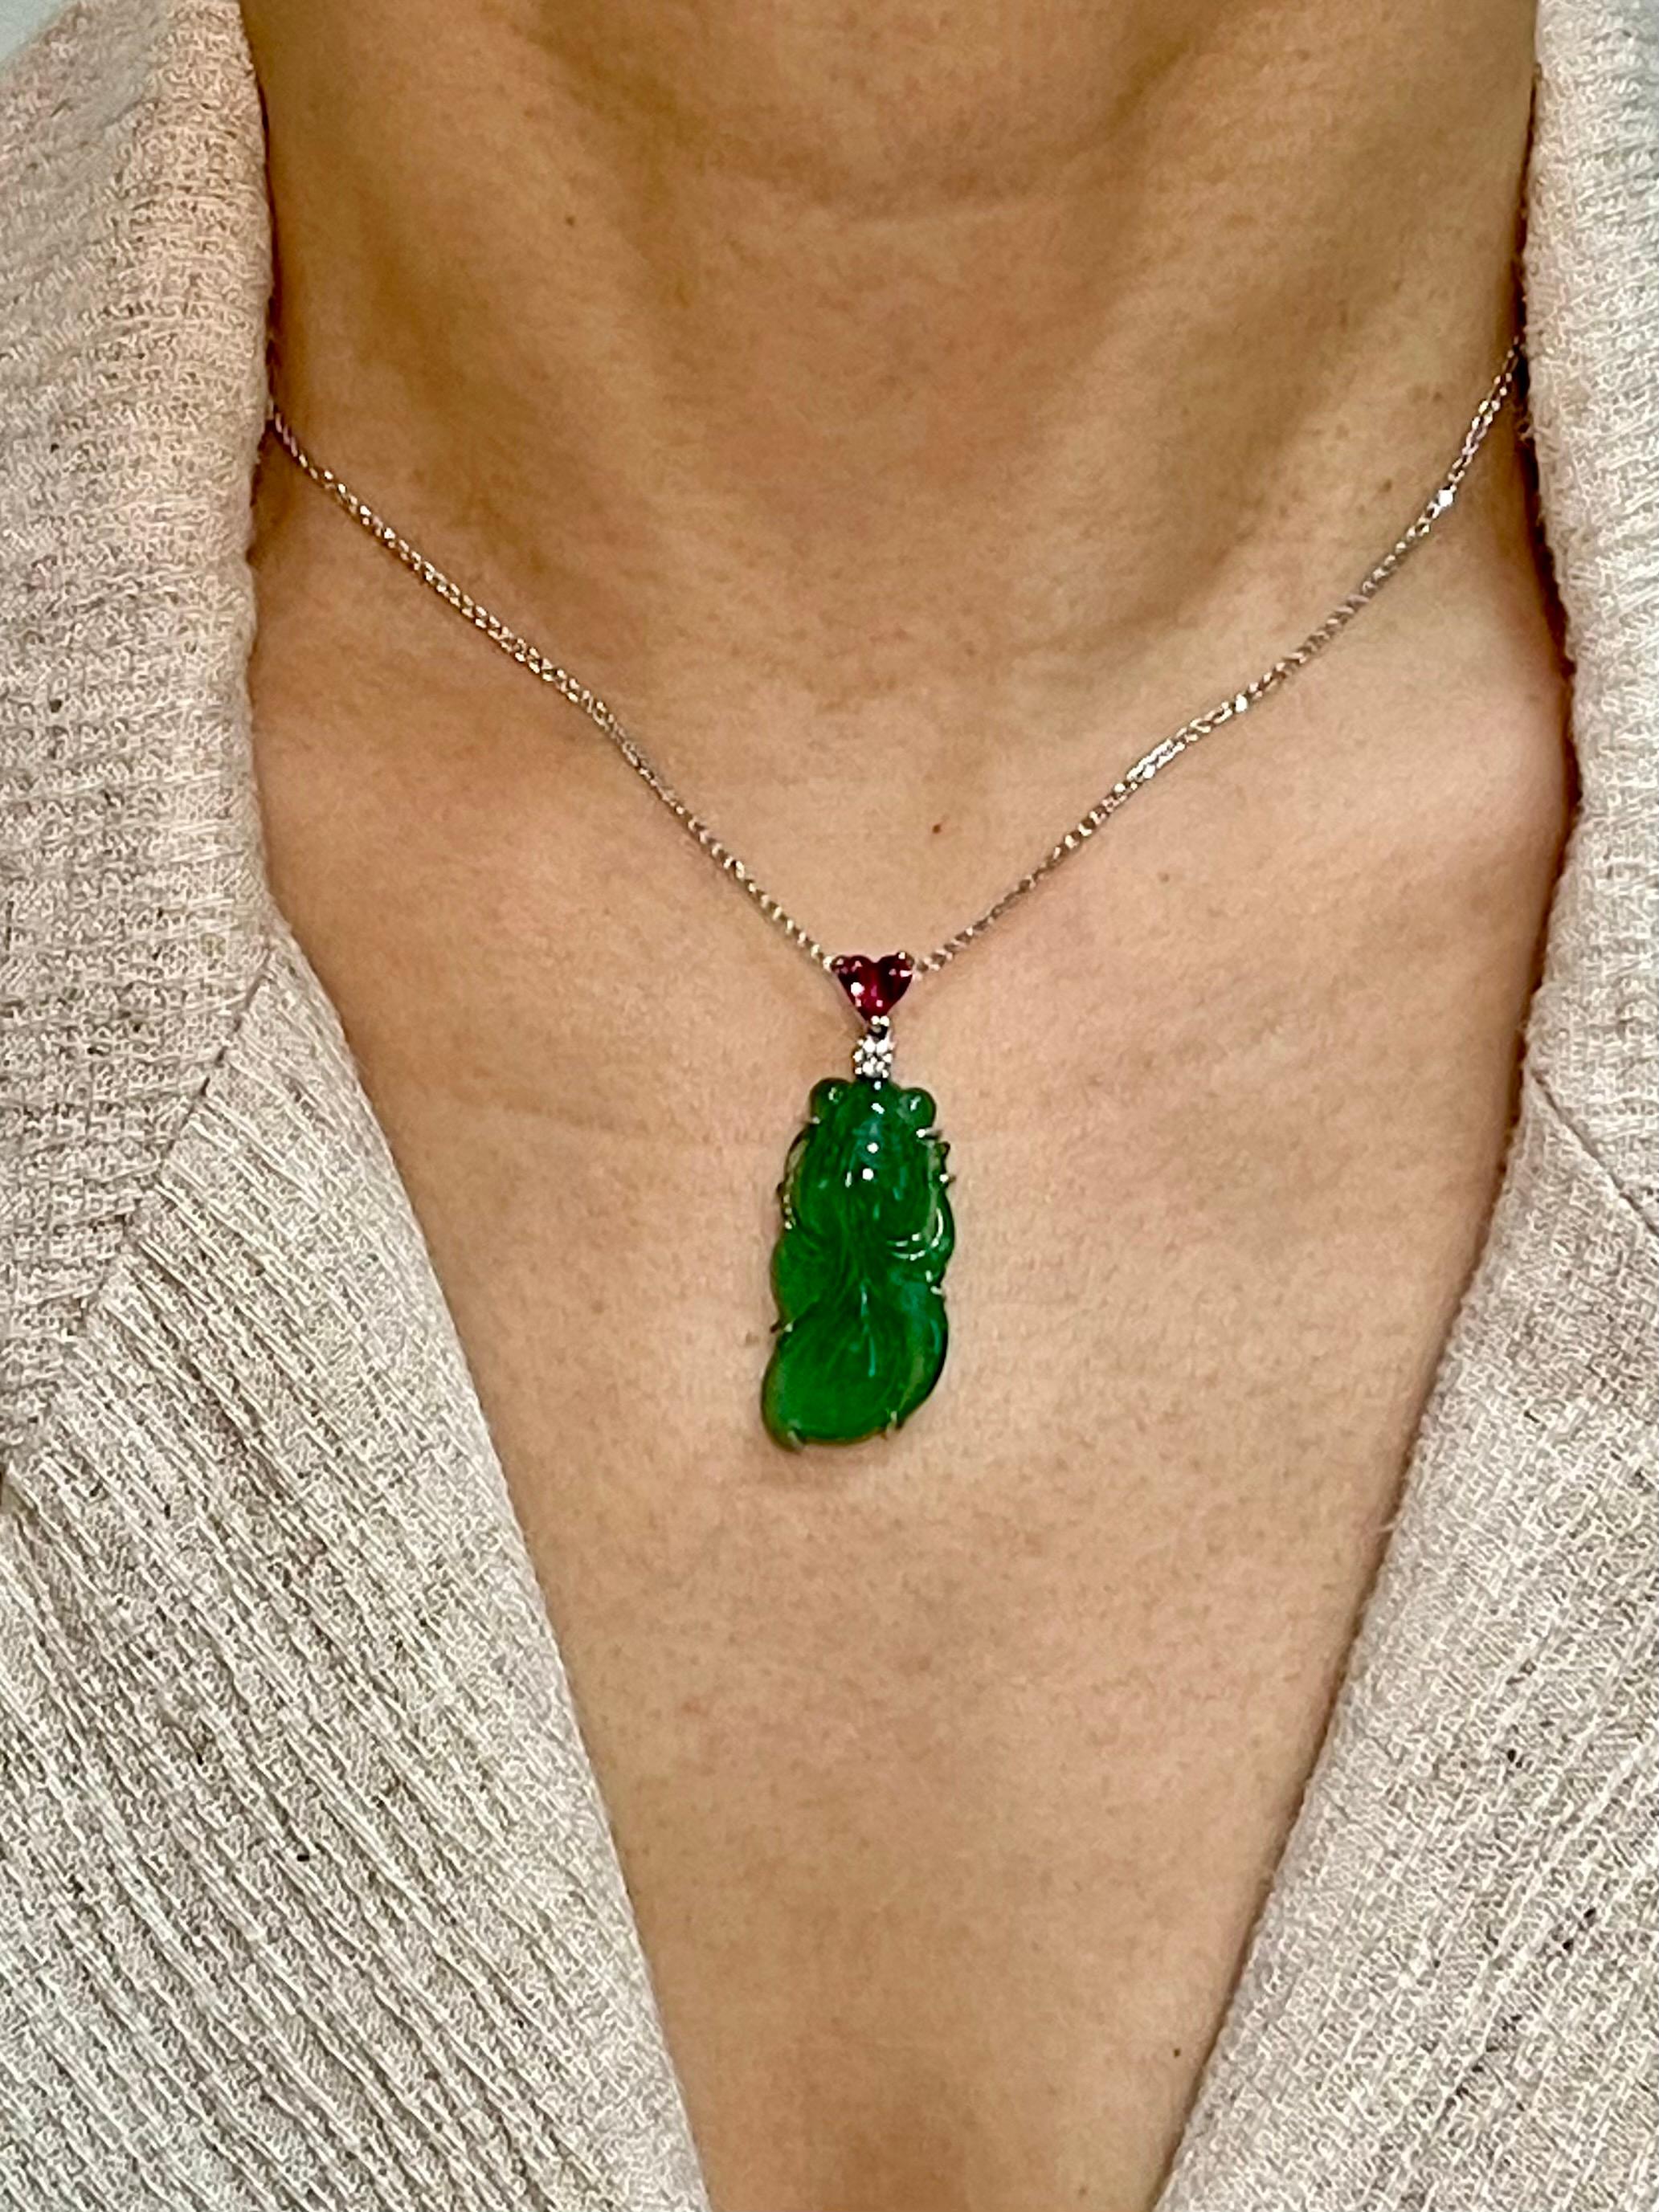 Please check out the HD video! This goldfish pendant is amazing and it GLOWS. It is equally good looking from the front as it is from the back. The imperial jade is full of 